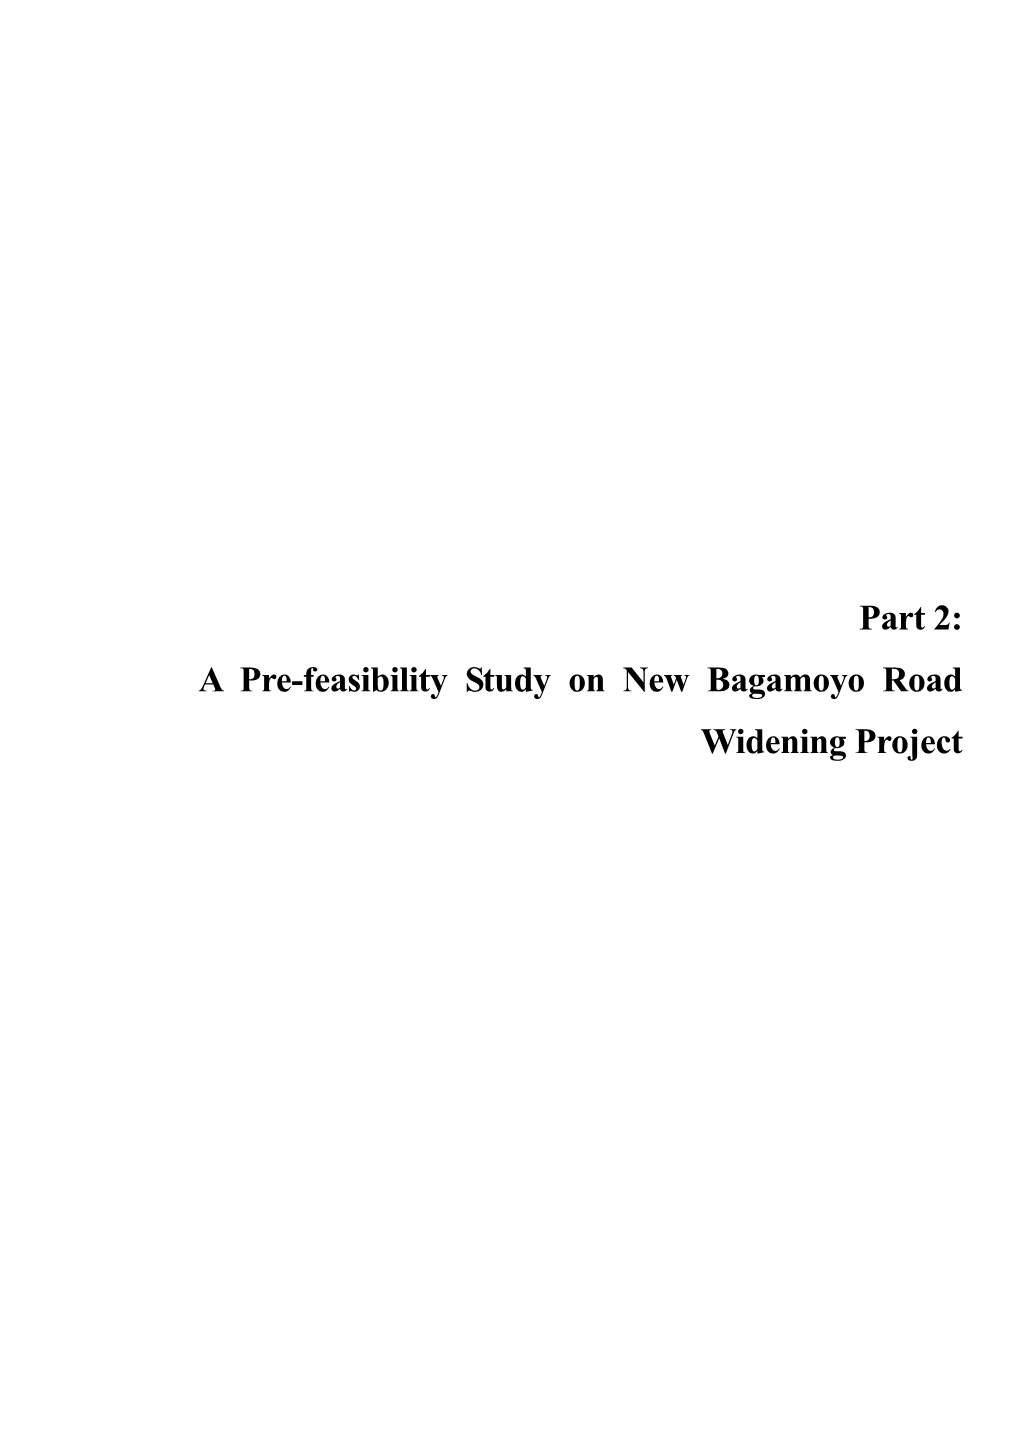 Part 2: a Pre-Feasibility Study on New Bagamoyo Road Widening Project